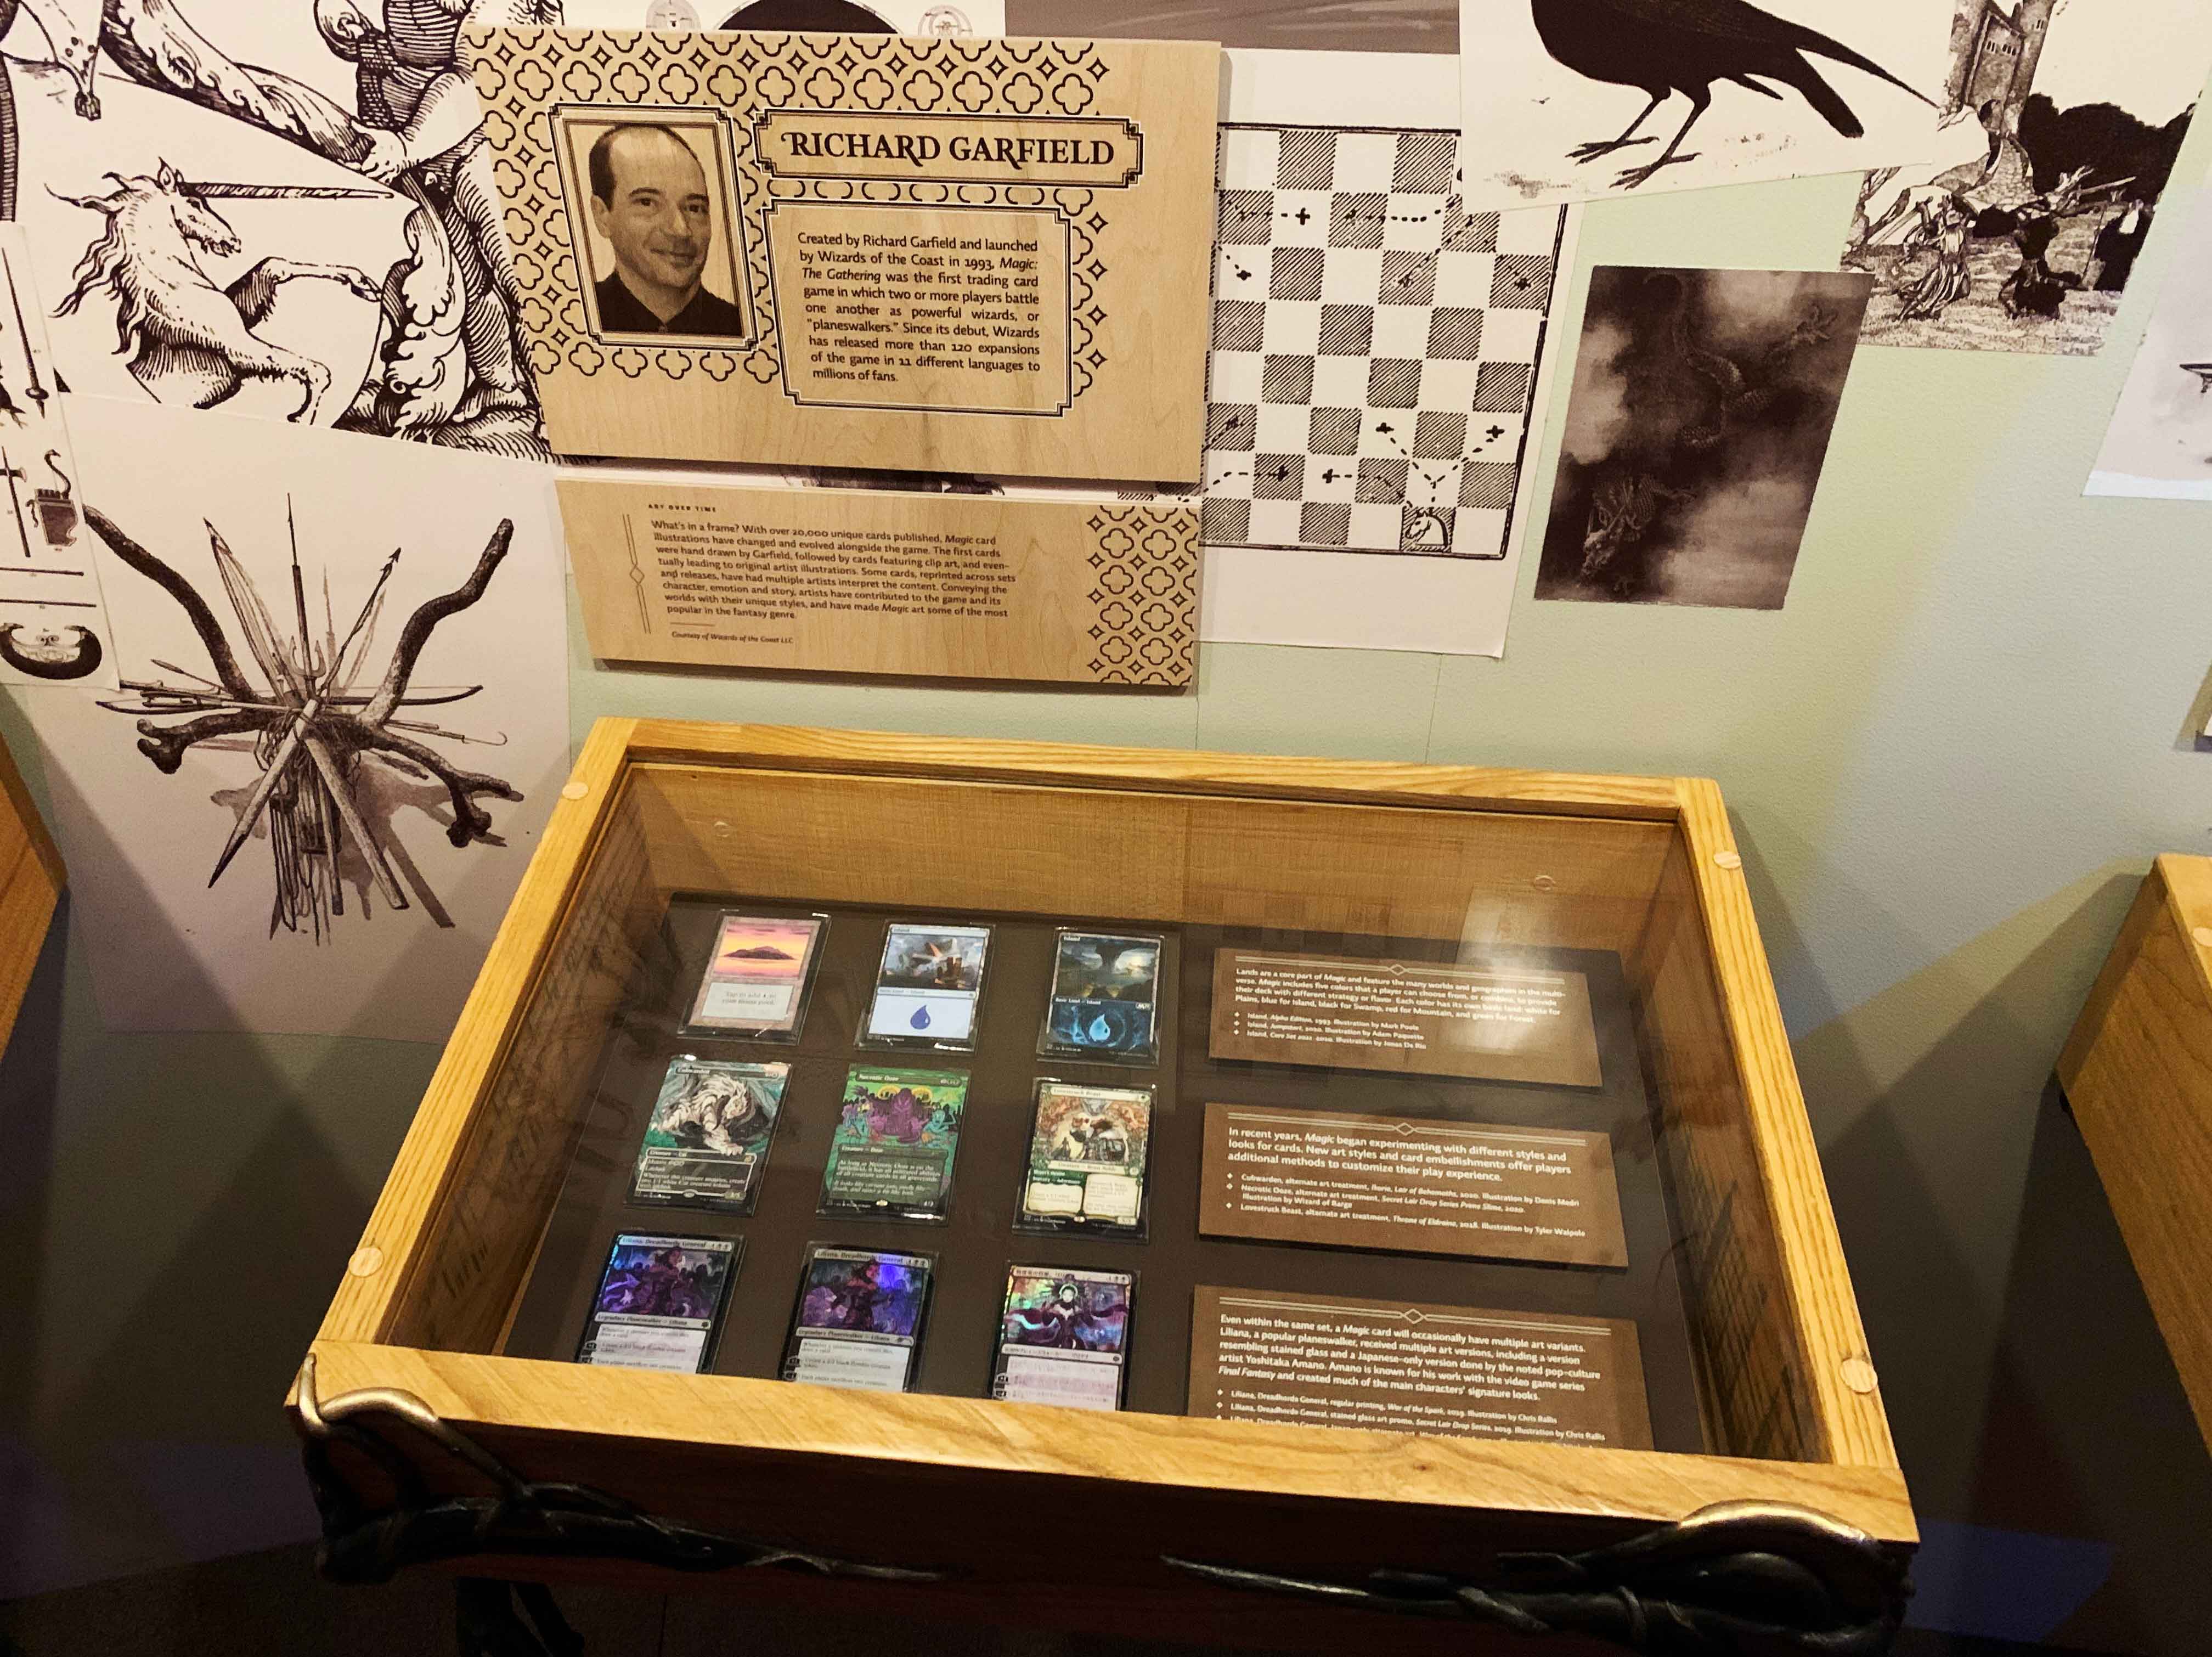 'Magic: The Gathering' cards on display in 'Fantasy: Worlds of Myth and Magic' exhibition at MoPOP (Courtesy: Wizards of the Coast LLC)